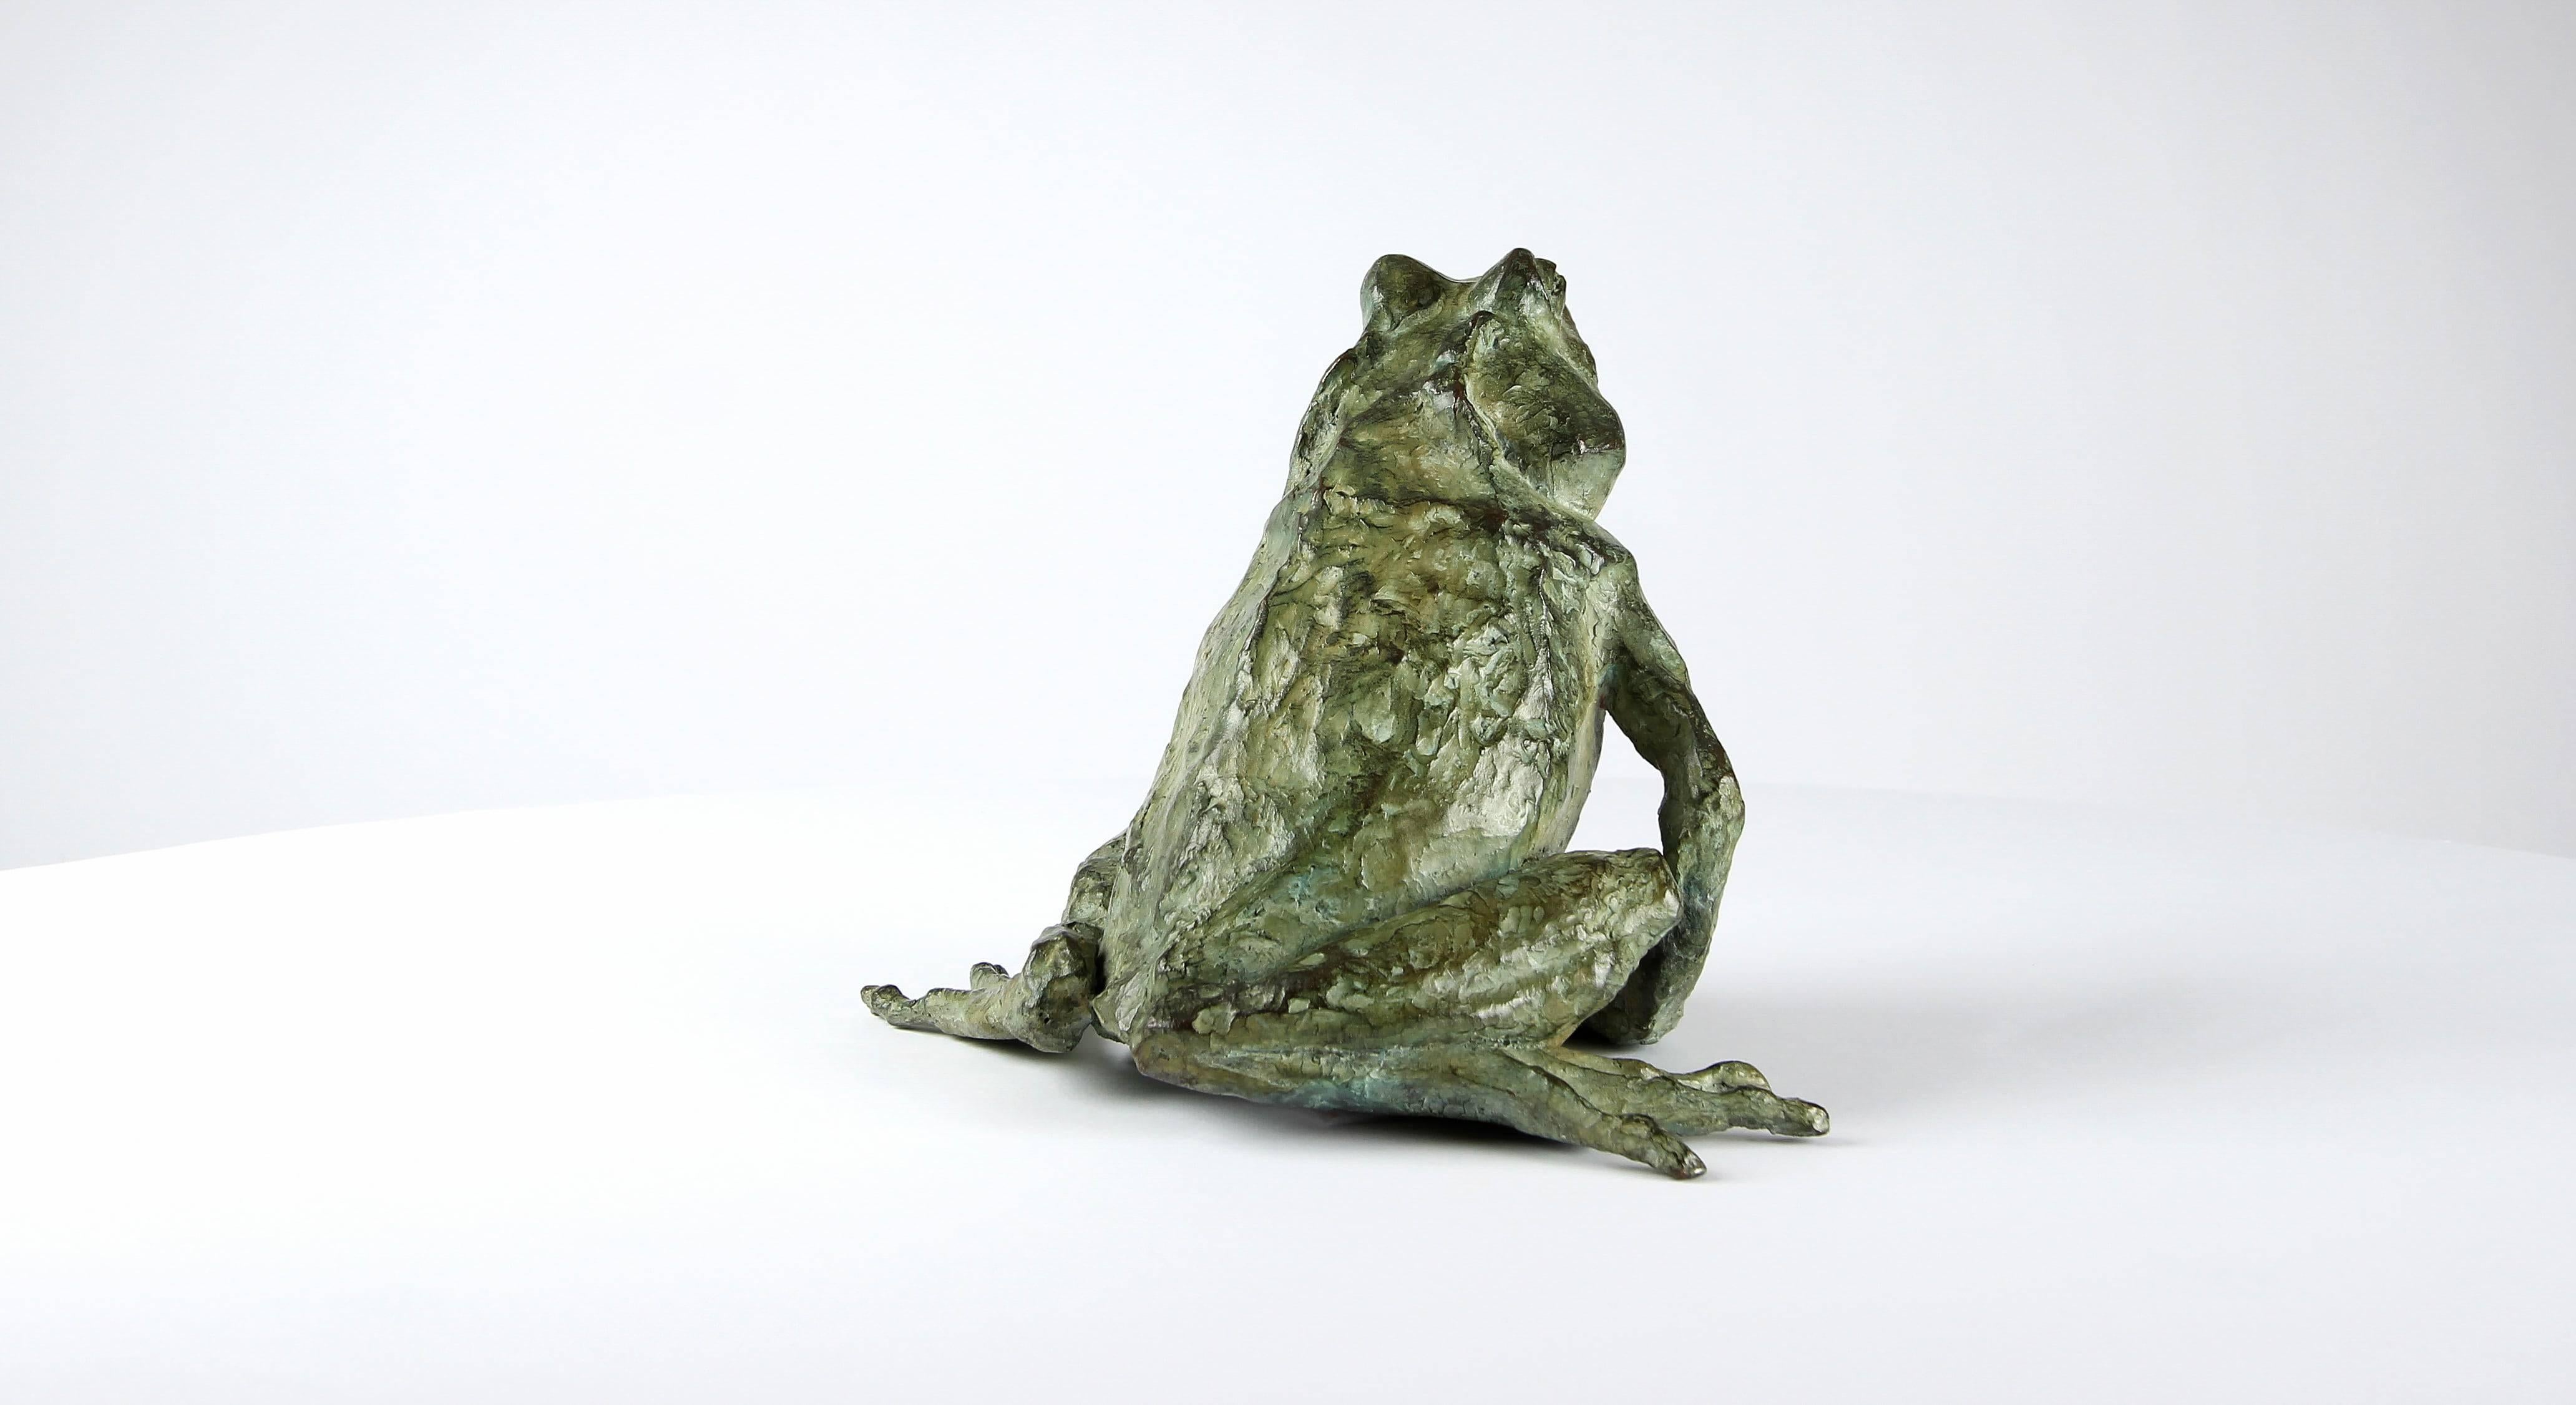 Magic Frog is a bronze sculpture by contemporary artist Chésade, dimensions are 17 × 14 × 12 cm (6.7 × 5.5 × 4.7 in). 
The sculpture is signed and numbered, it is part of a limited edition of 8 editions + 4 artist’s proofs, and comes with a